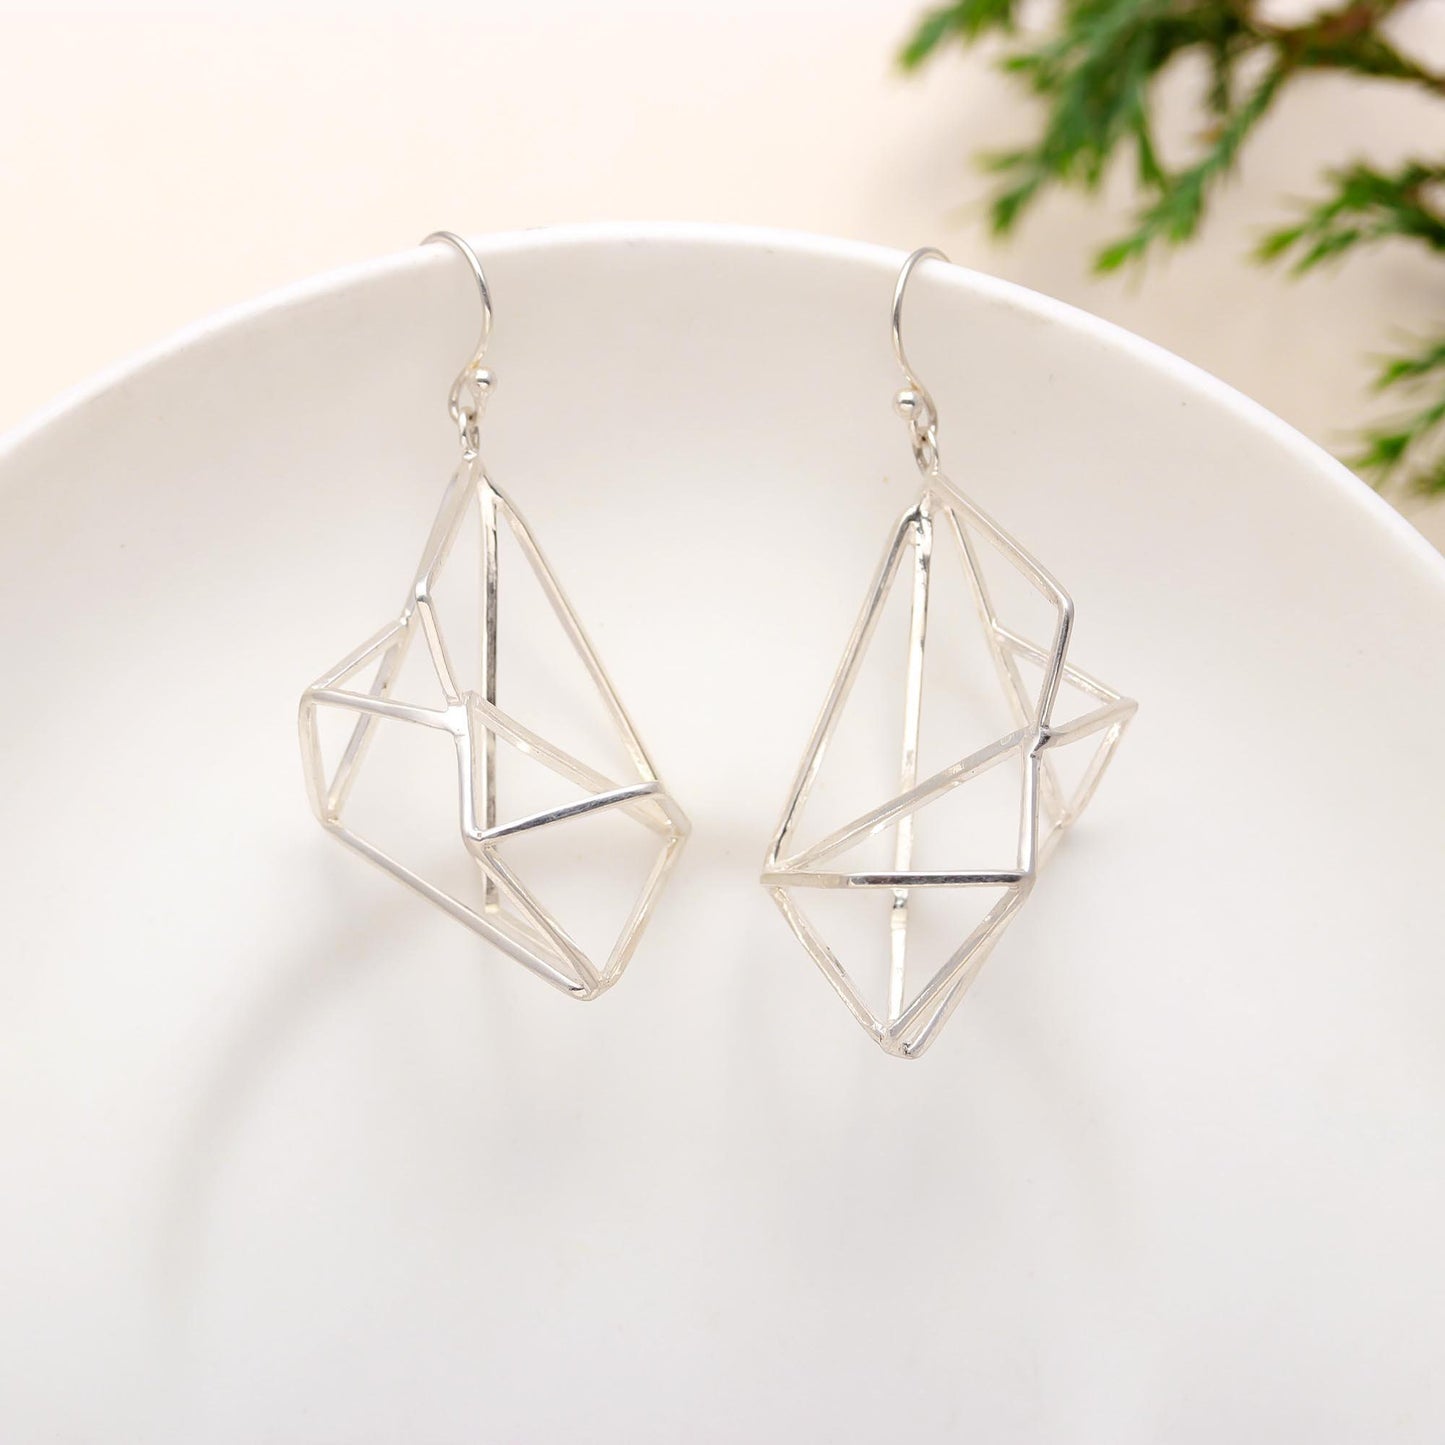 Solid 925 Sterling Silver Geometrical Earring Dangle Earwire, Birthday Gift, Abstract, Anniversary, Designer, Woman, Girl, Gold , Rose Gold